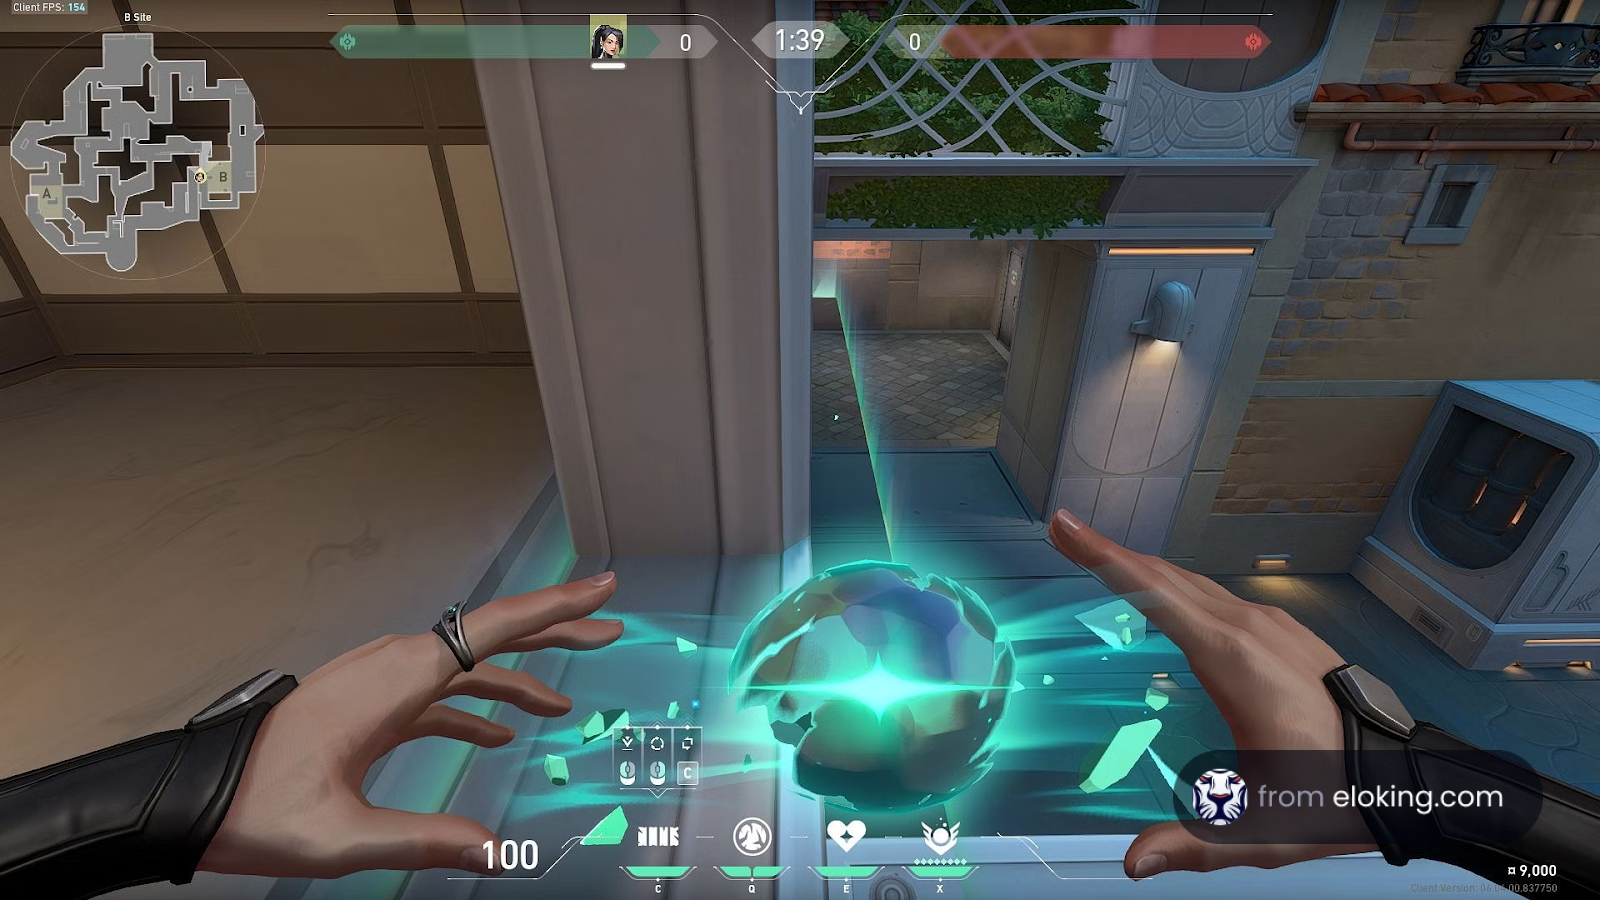 First-person view in a shooting game showing hands casting a magical spell